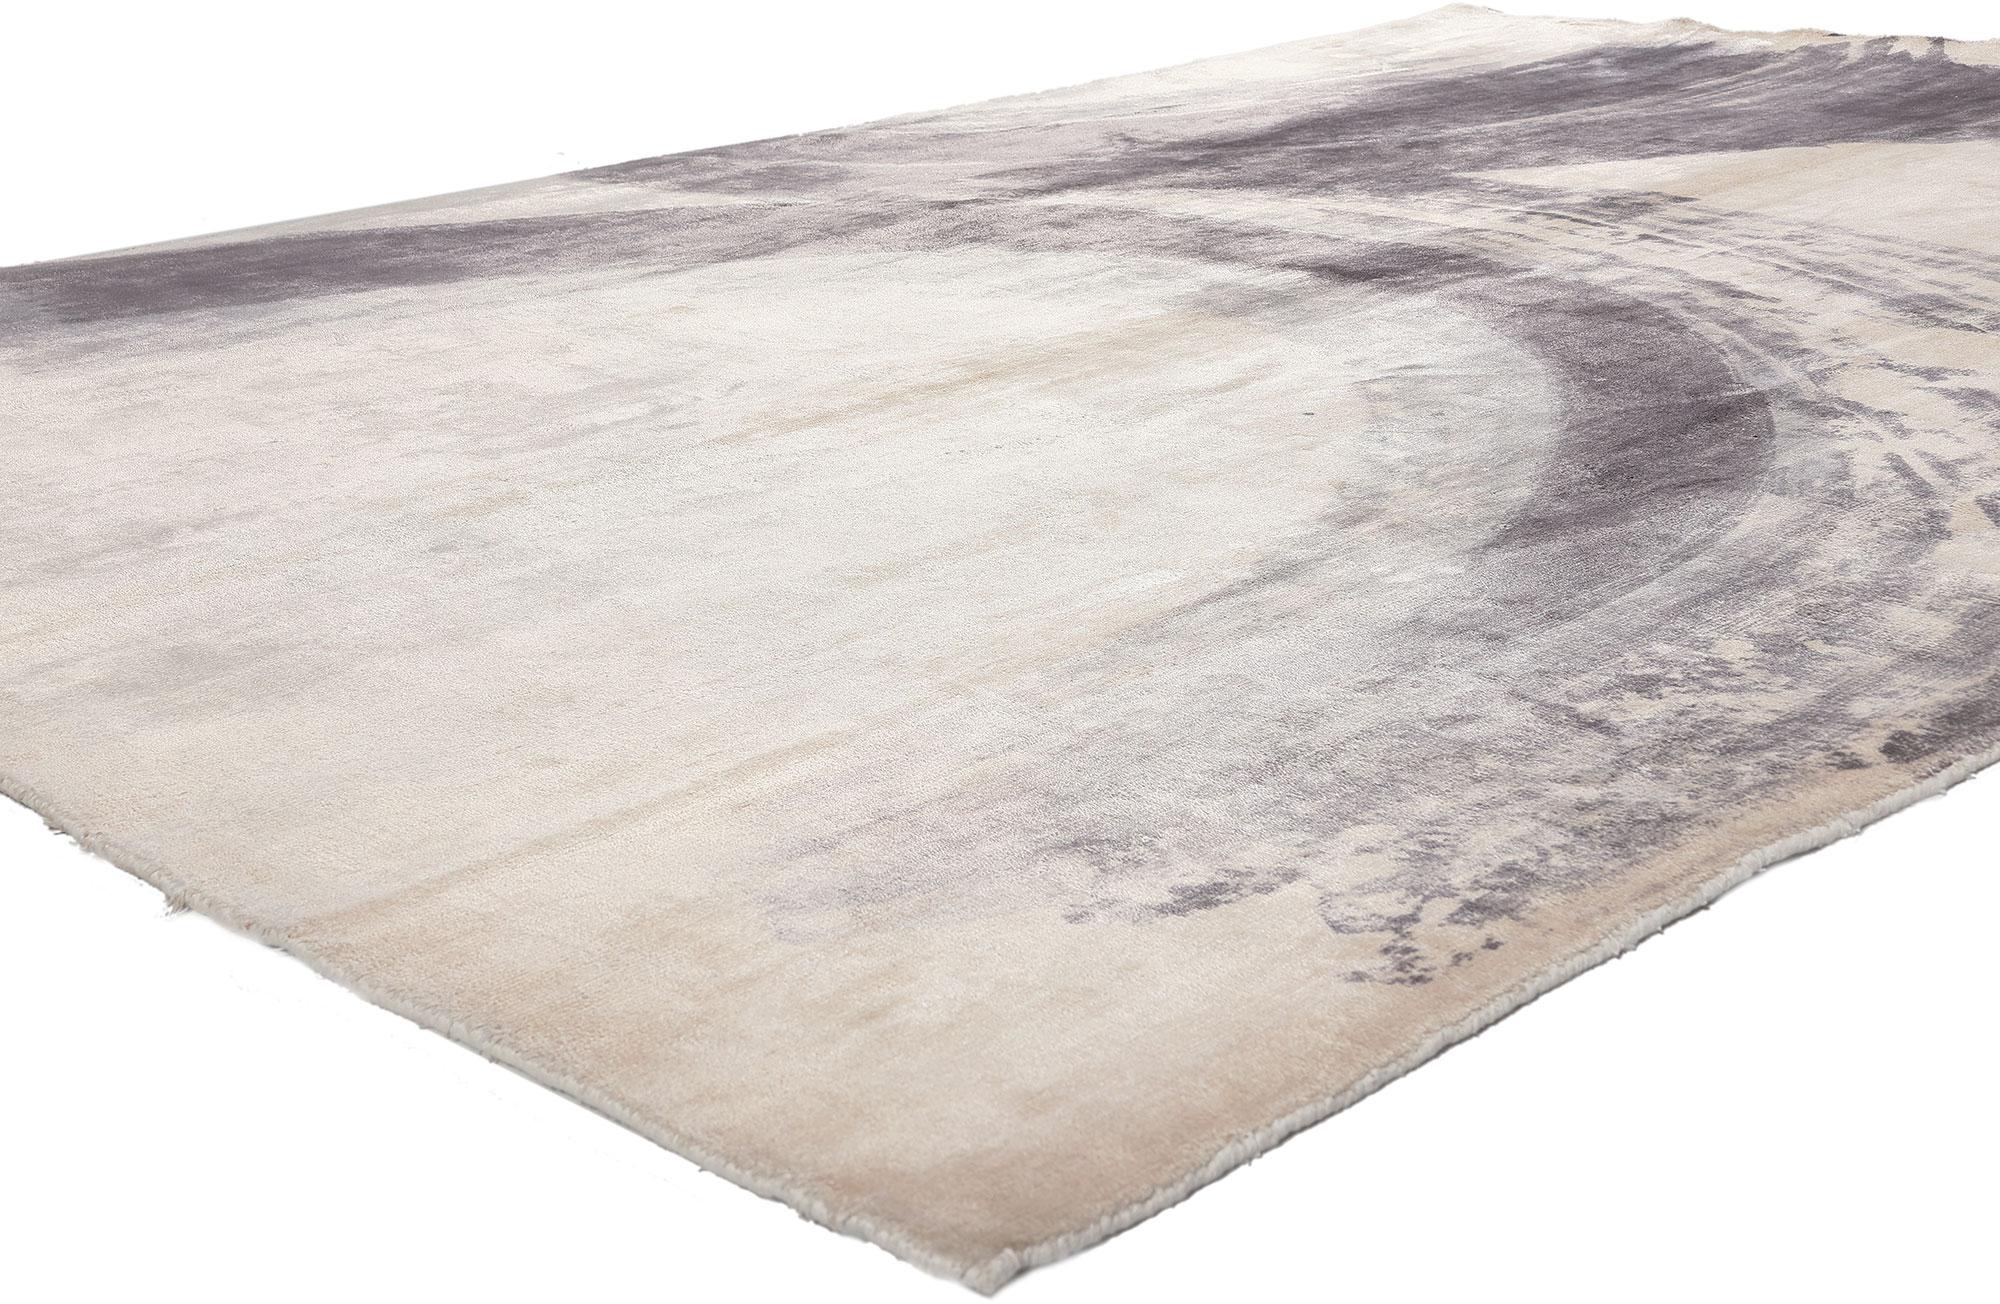 30005 Contemporary Abstract Rug, 06'07 x 09'07.
Abstract Expressionism meets modern minimalism in this wool and silk contemporary area rug. The expressionist design and neutral colors woven into this piece work together creating a luxe modern look.